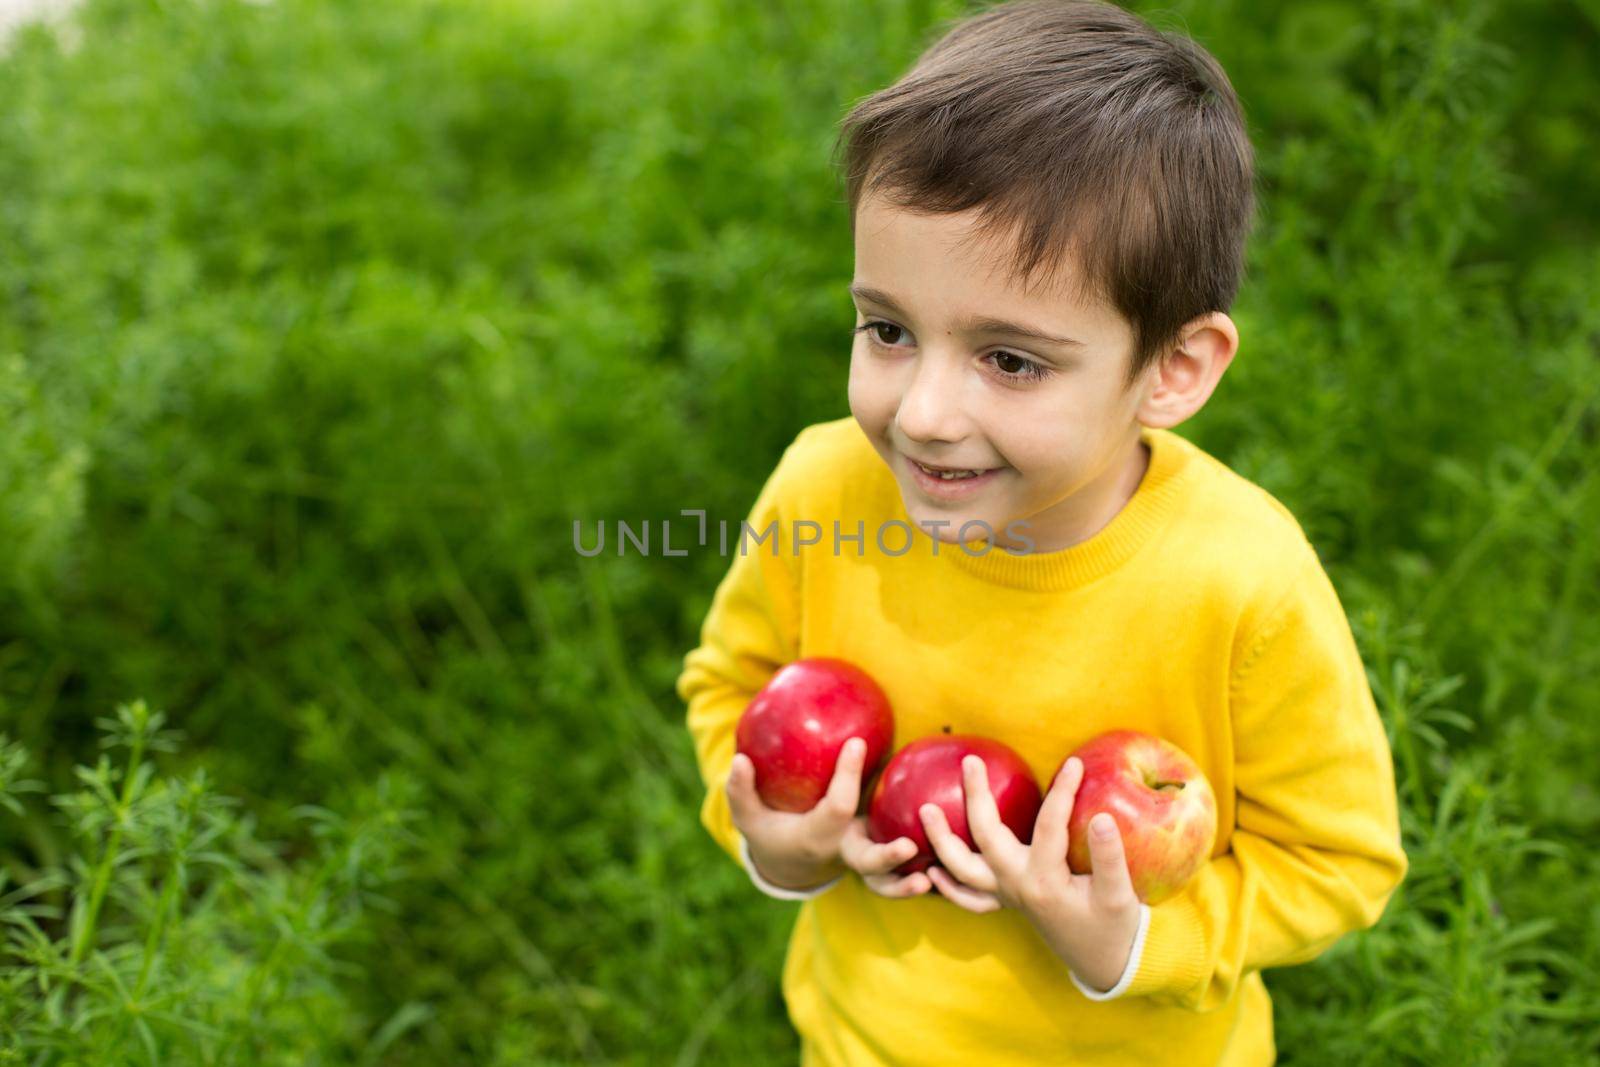 Cute little boy picking apples in a green grass background at sunny day. Healthy nutrition by StudioPeace